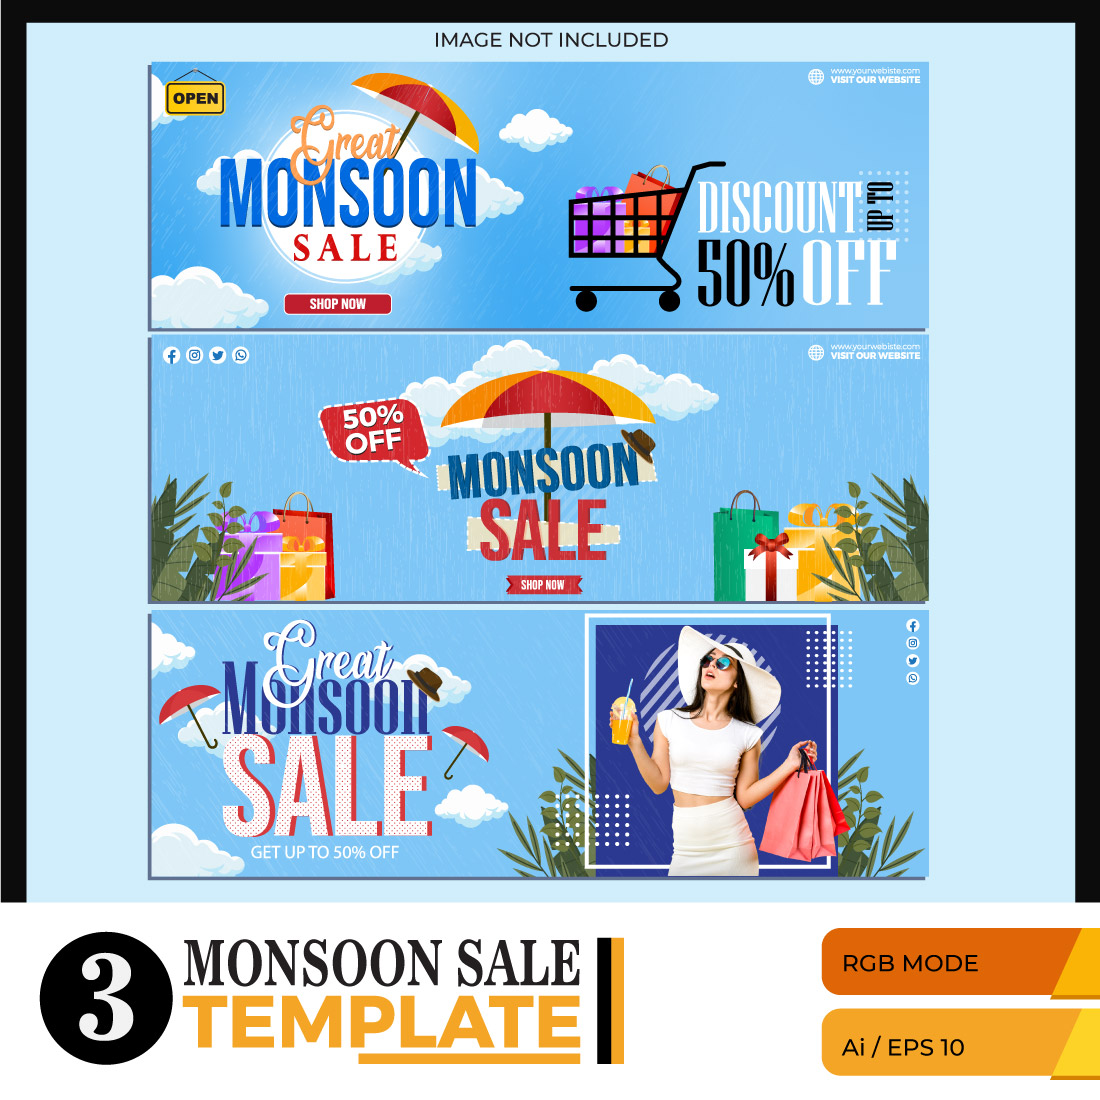 Umbrella and shopping bags for monsoon season sale Banner landing page web header template design cover image.